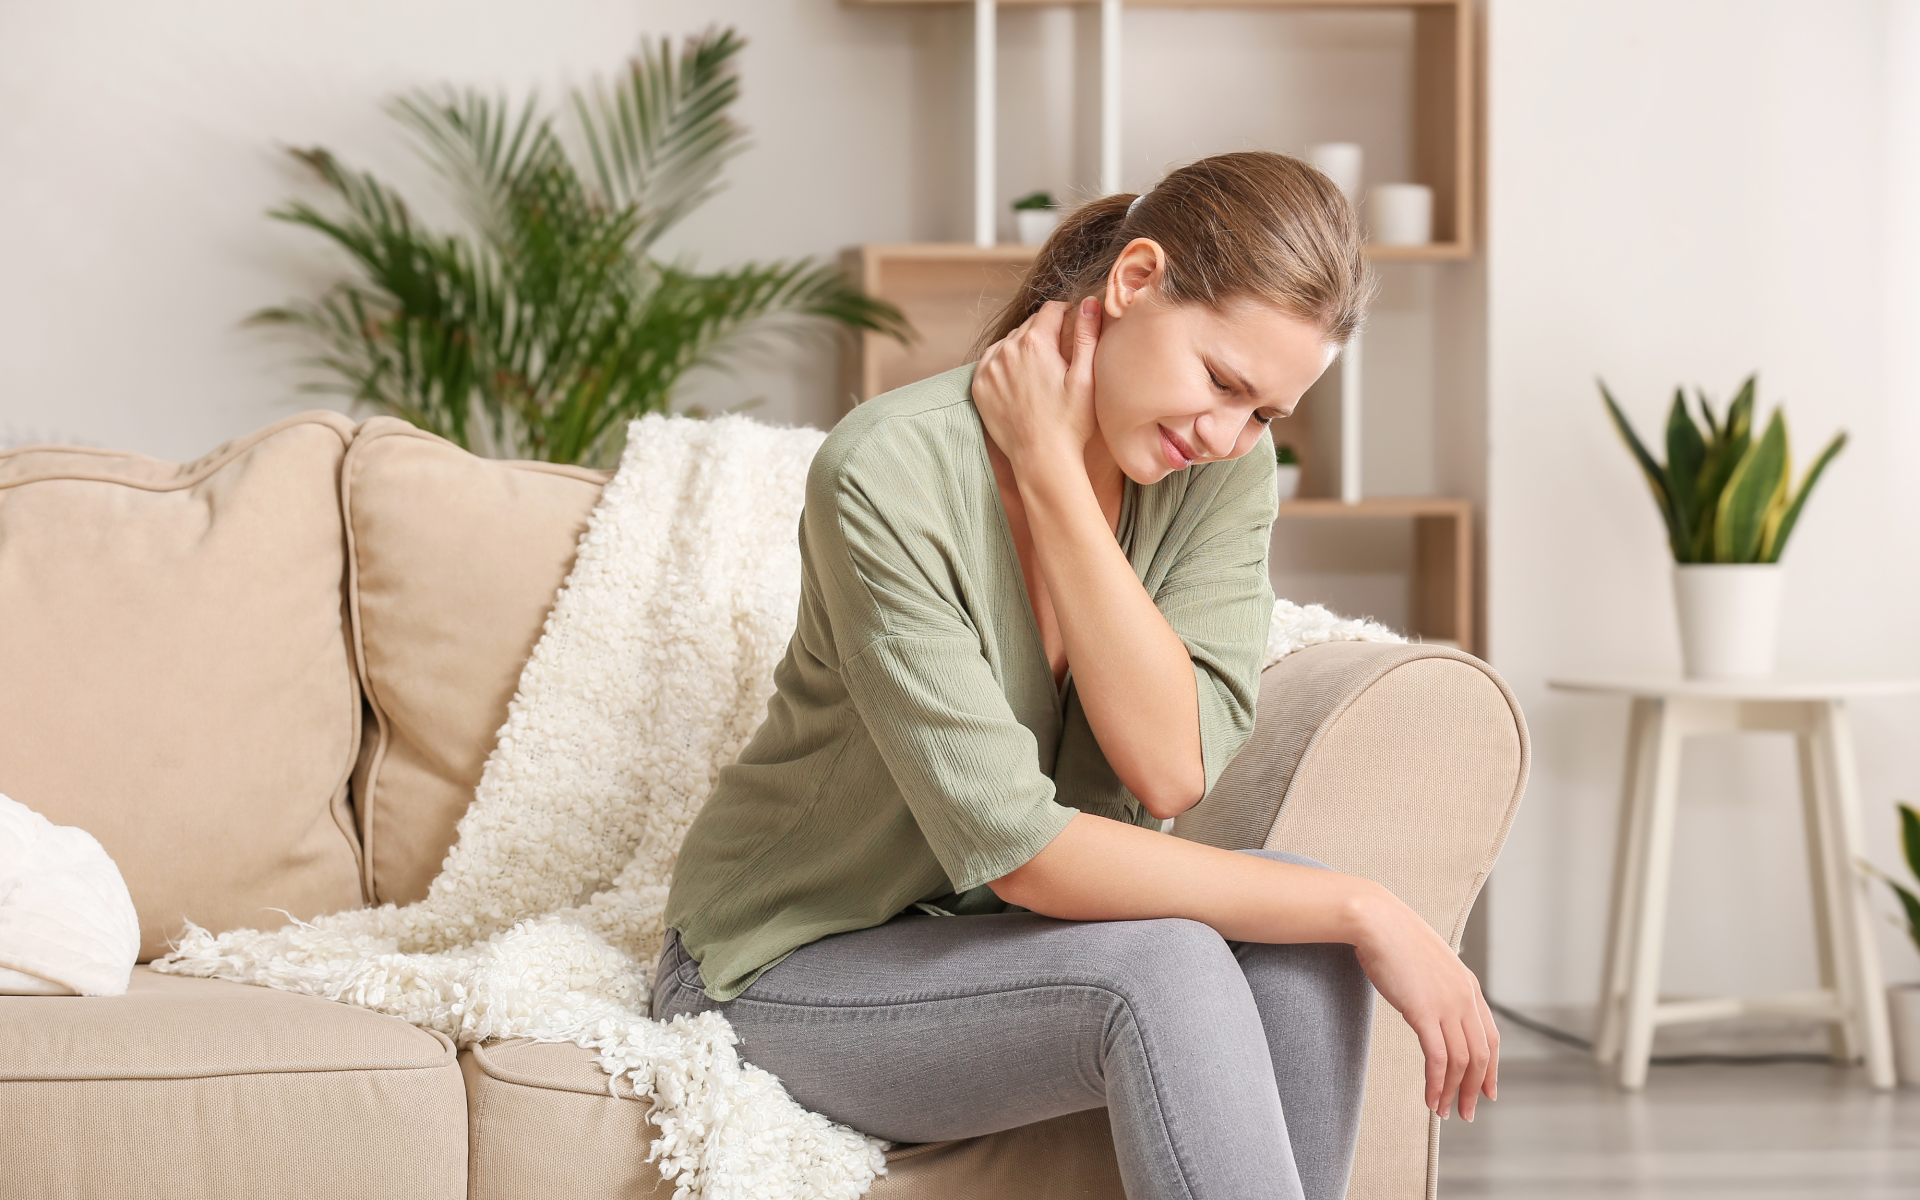 Woman sitting on couch holding neck